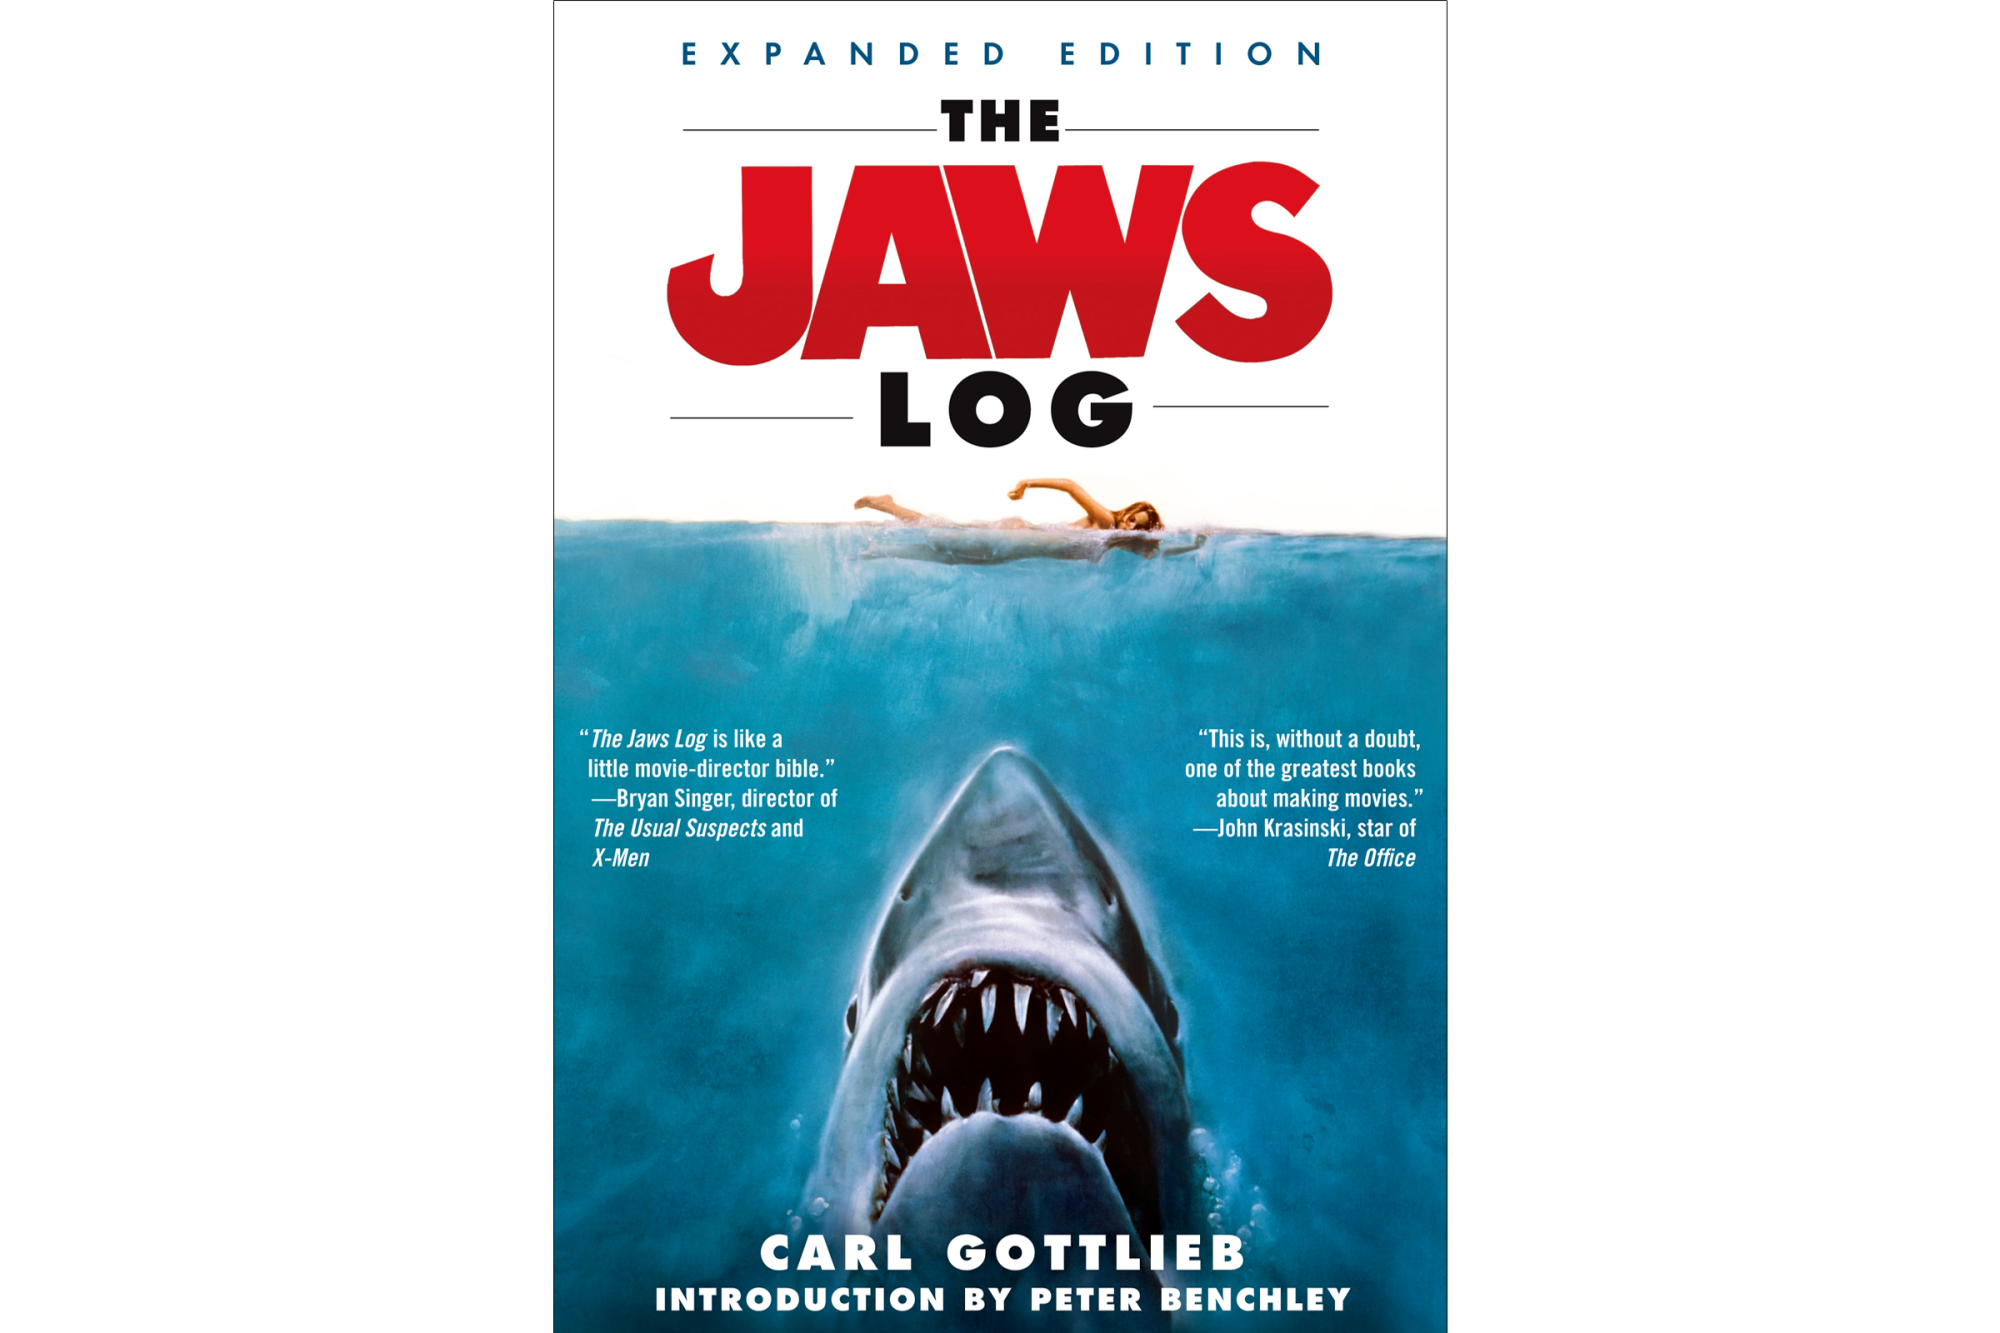 "The Jaws Log: Expanded Edition" by Carl Gottlieb